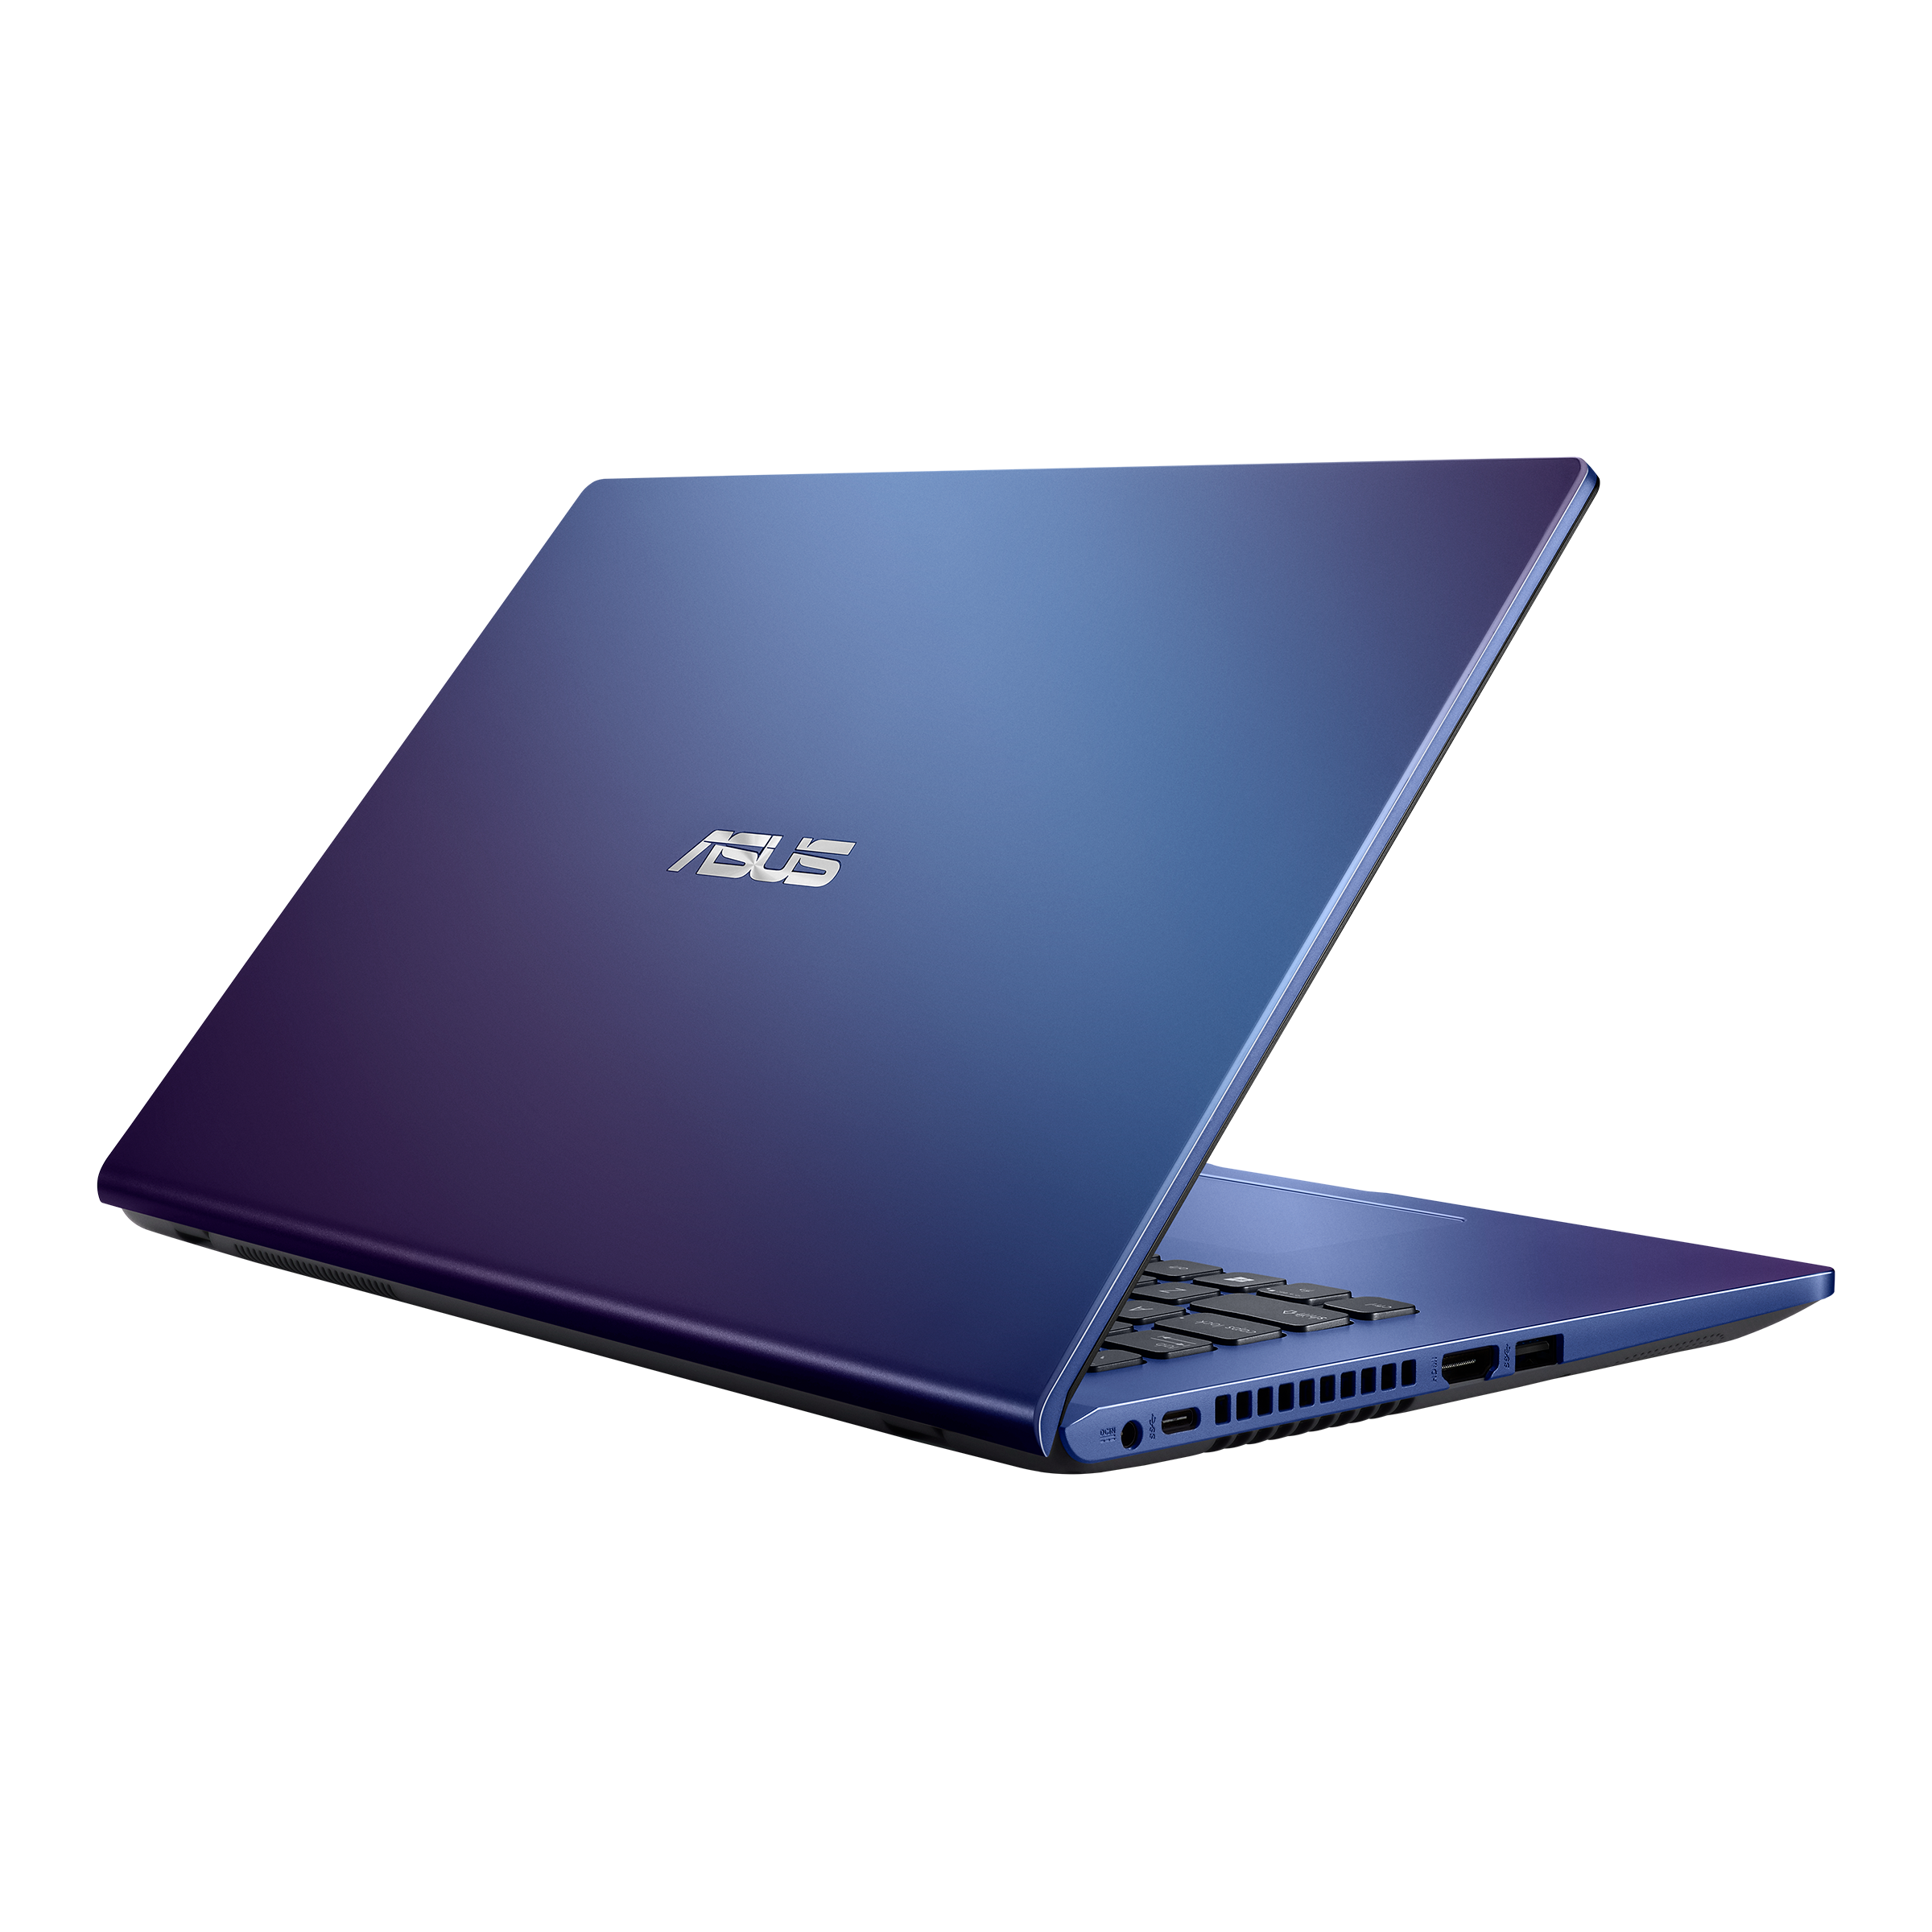 ASUS E203｜Laptops For Home｜ASUS Global